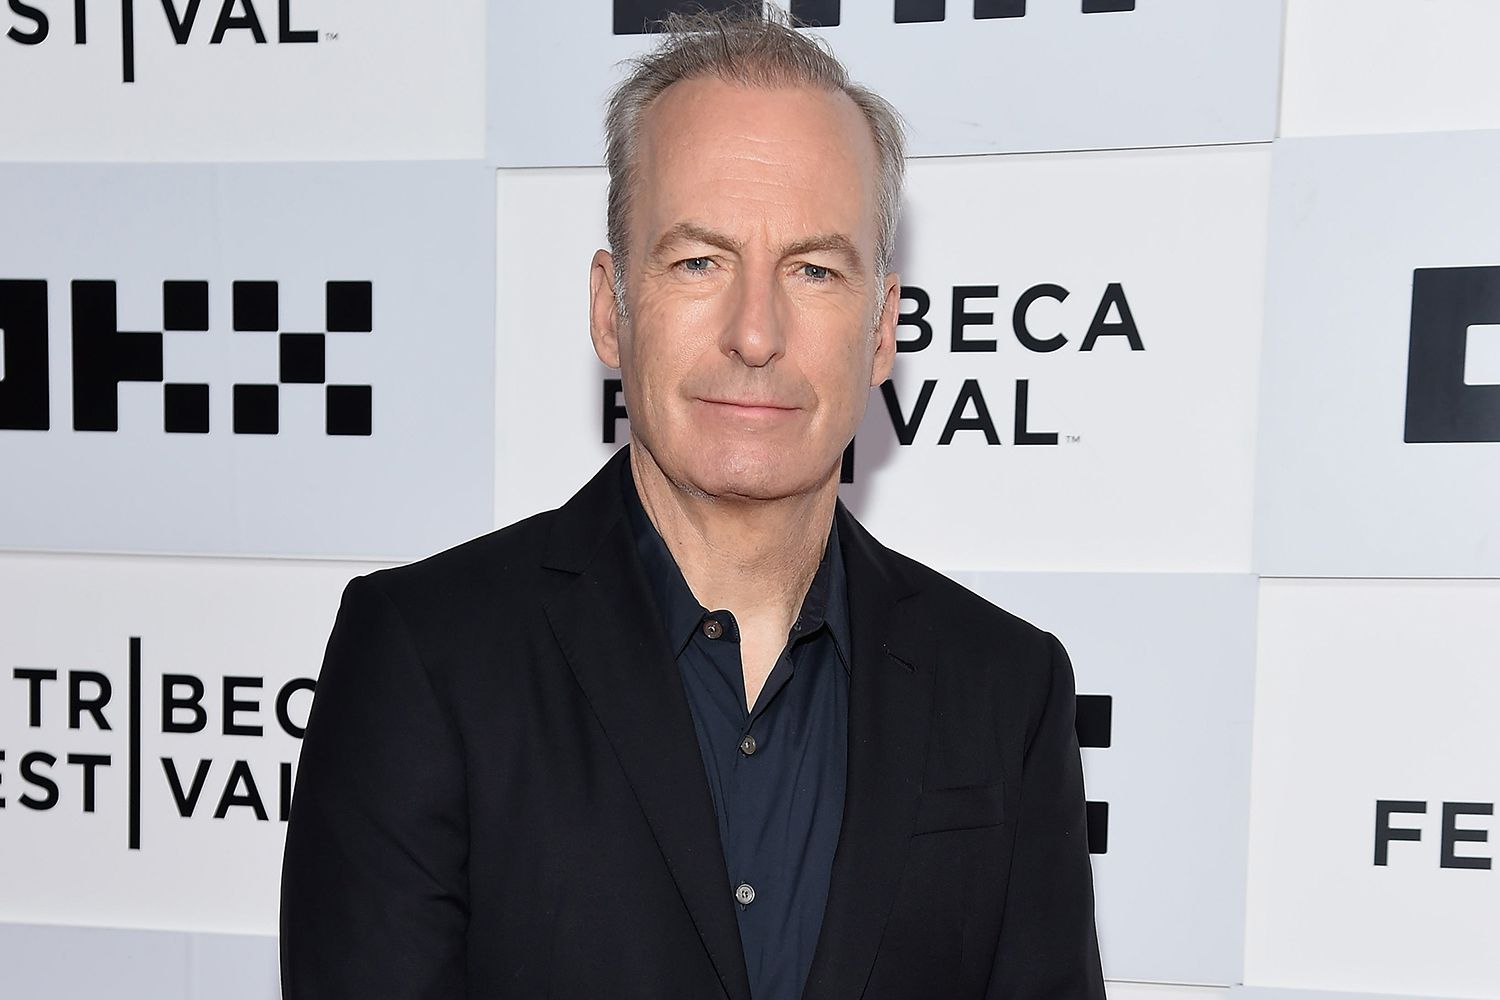 Bob Odenkirk attends the screening of the mid-season premiere episode of the final season of "Better Call Saul"